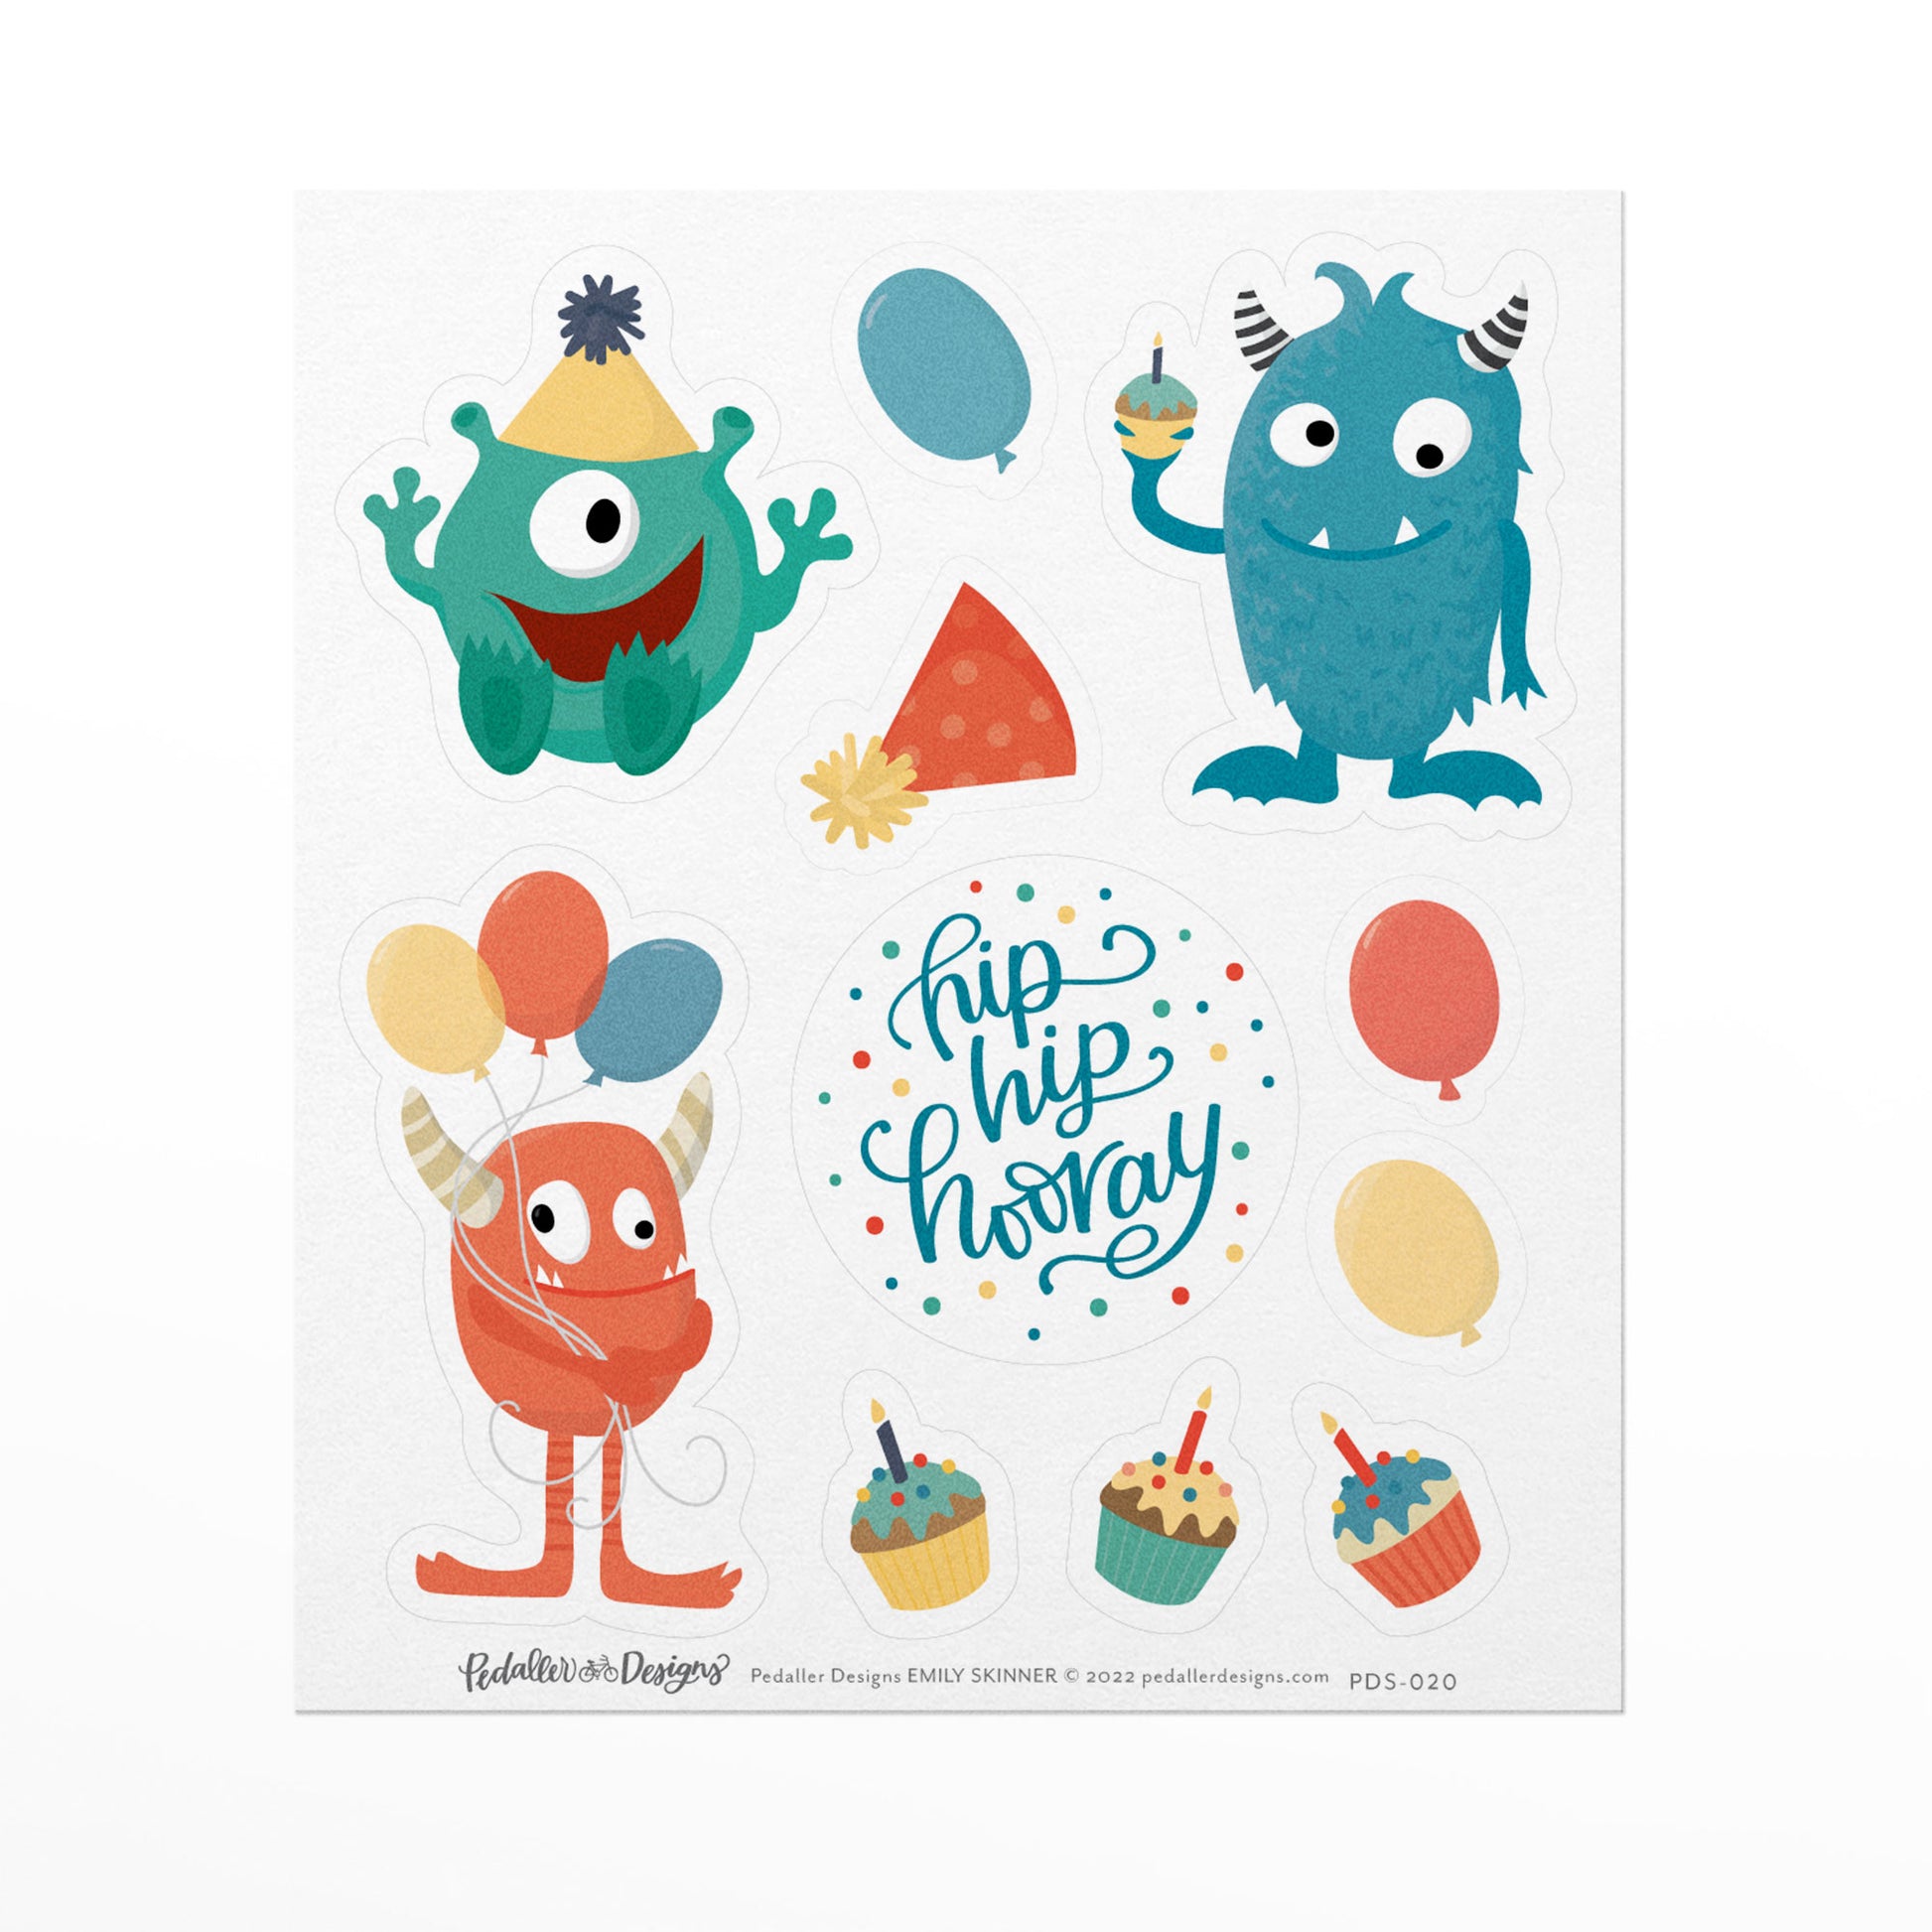 Birthday monster themed sticker sheet with  11 stickers of monsters wearing party hats and holding balloons and cupcakes sized at 1.5 to 0.5 inch.